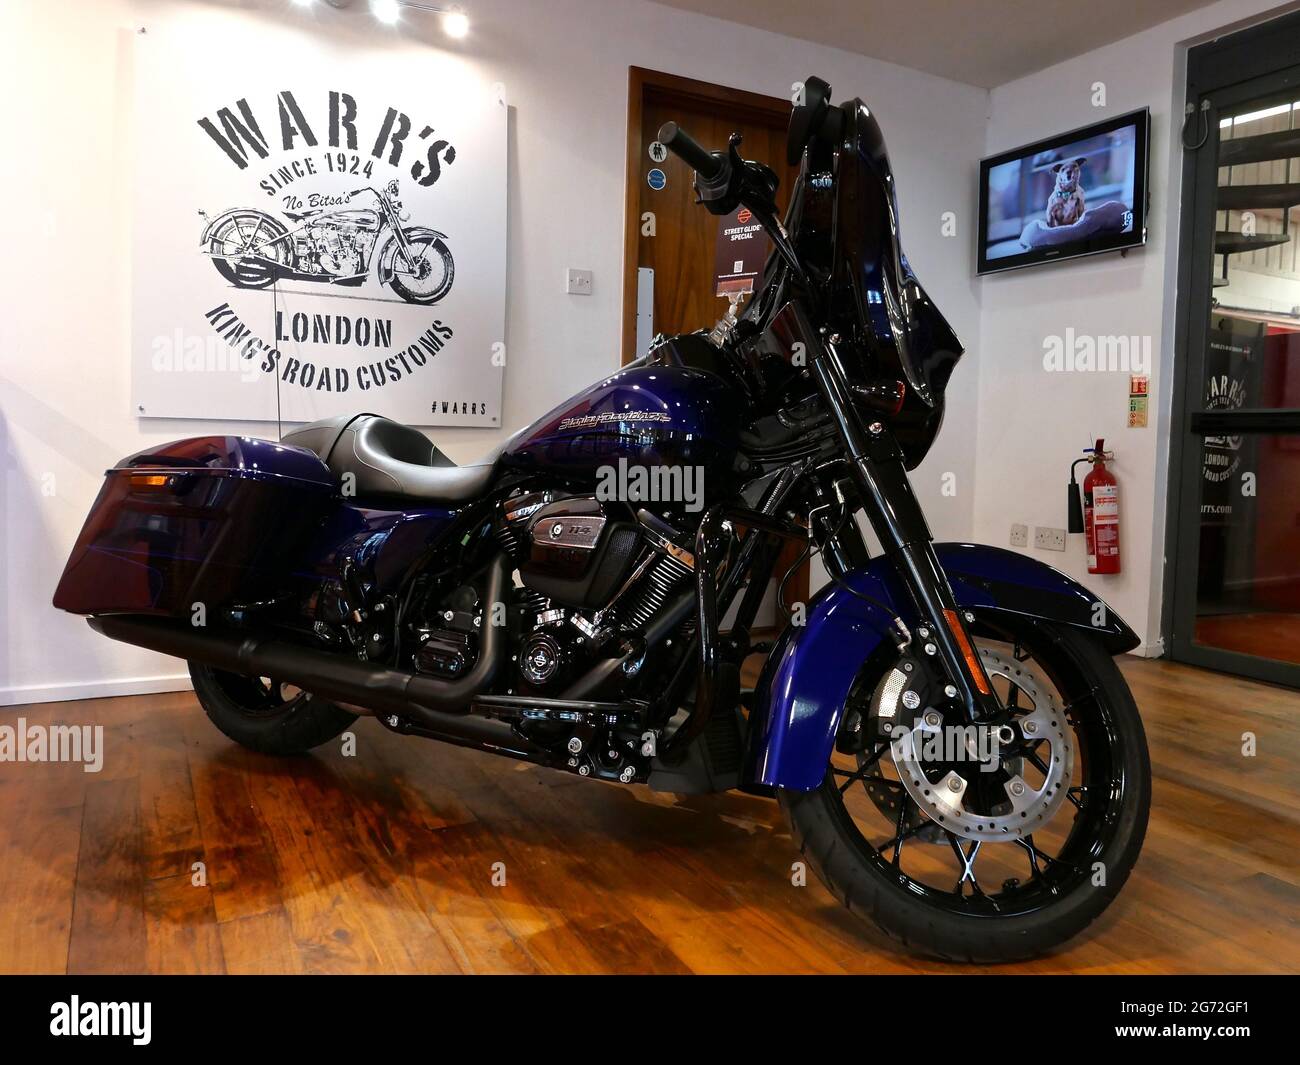 Warr S Harley Davidson Is Europe S Oldest And Biggest Selling Authorised Harley Dealership Group With Two Award Winning Sites In London Established In 1924 Our Services Including New And Used Sales Service And A